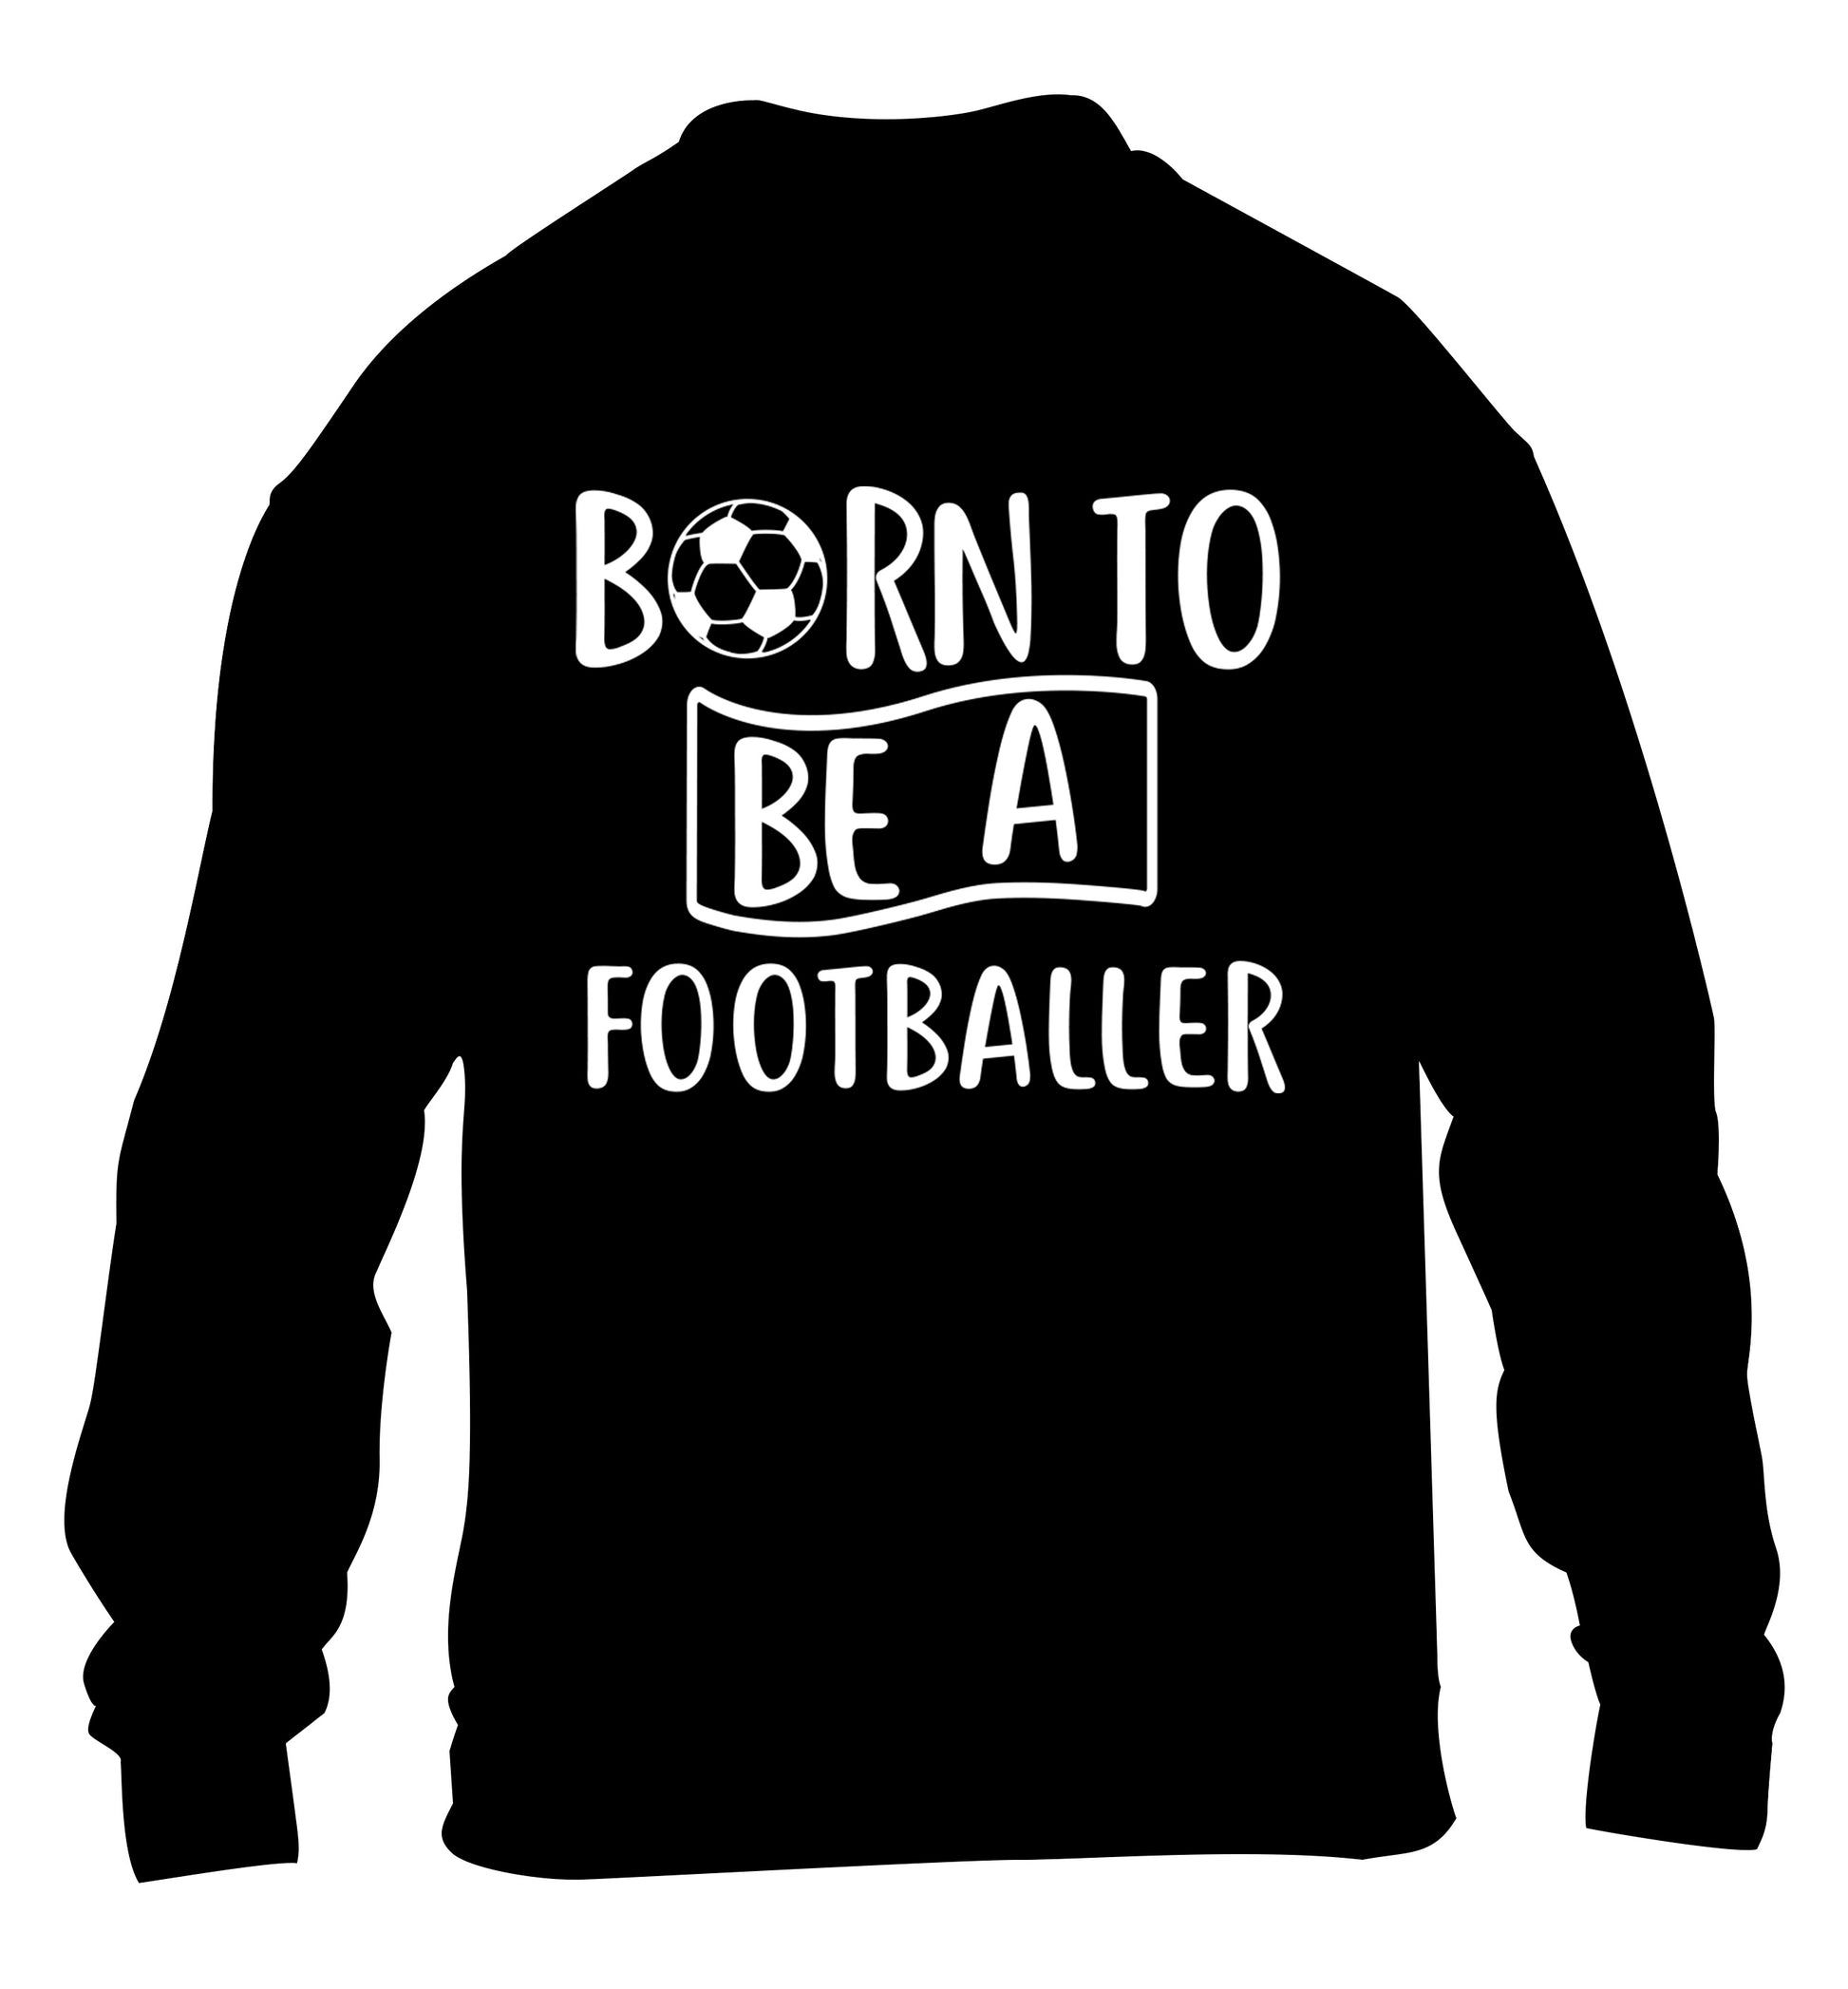 Born to be a footballer children's black sweater 12-14 Years